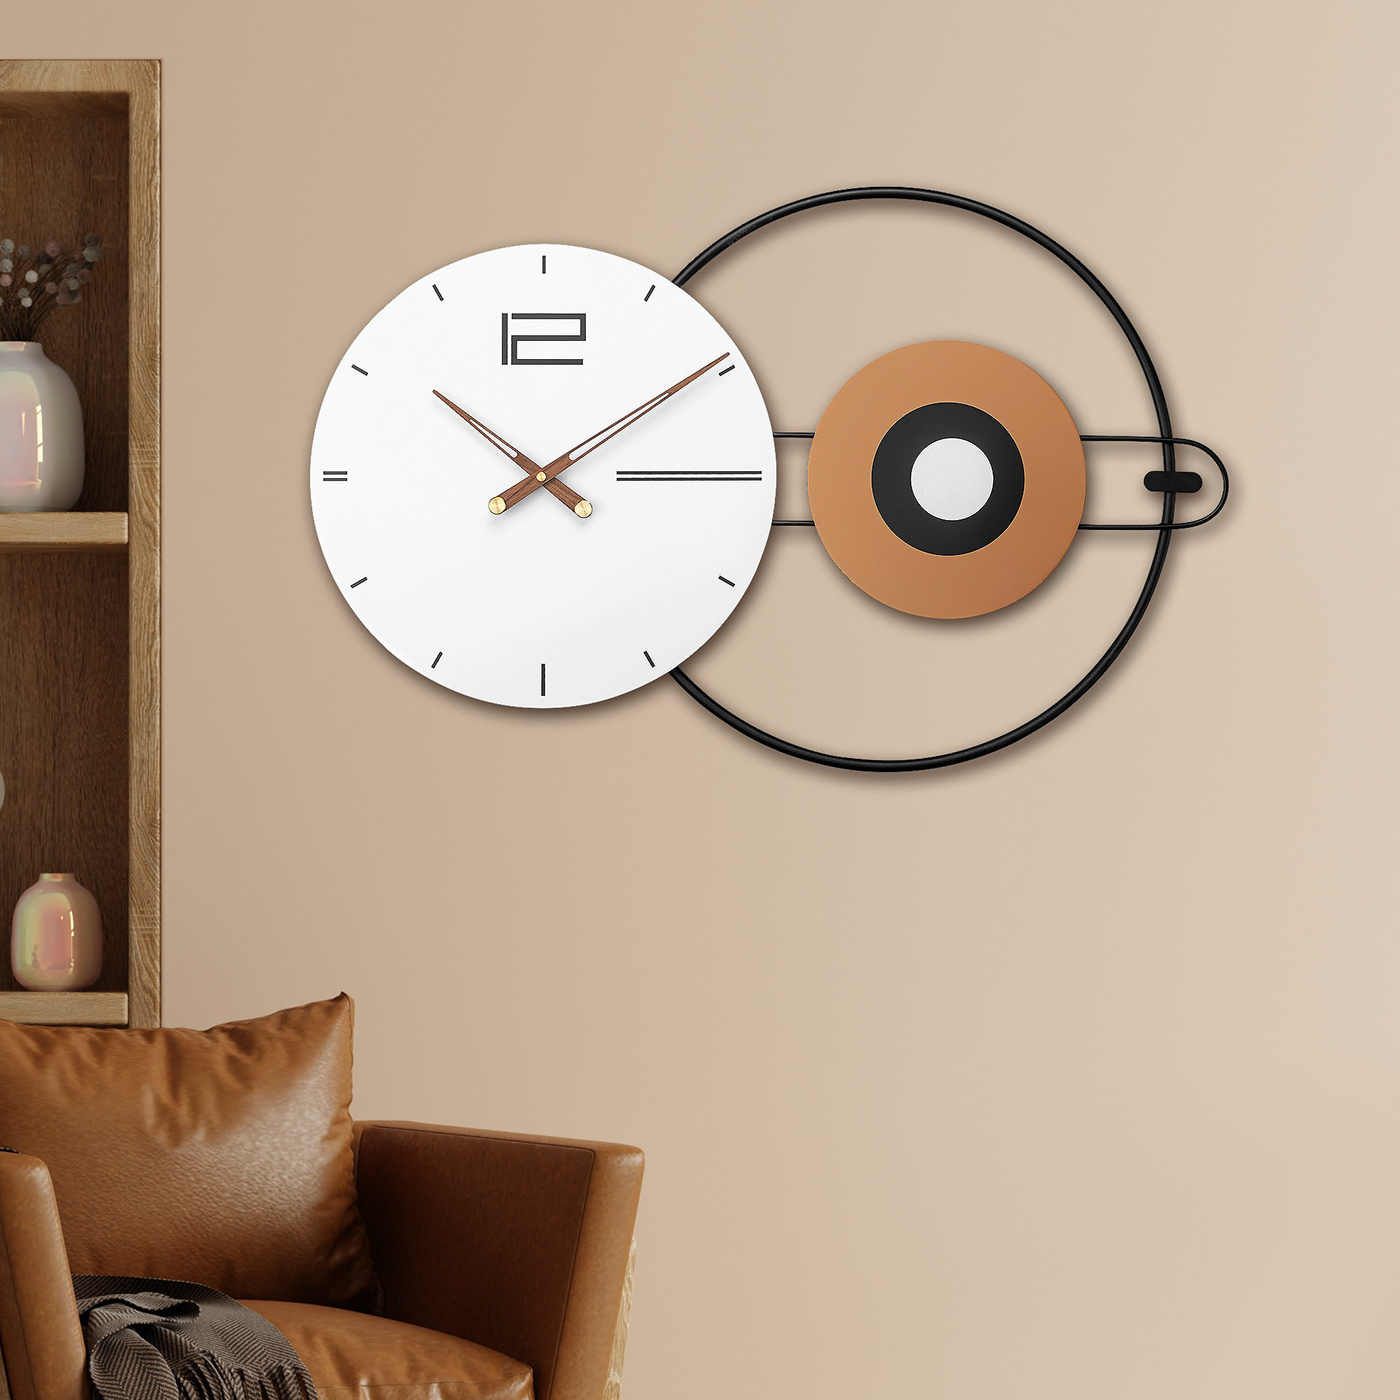 Home Decoration Items wall clock Dekor Company clocks for wall Designer Wall Clock wall clock online watches wall